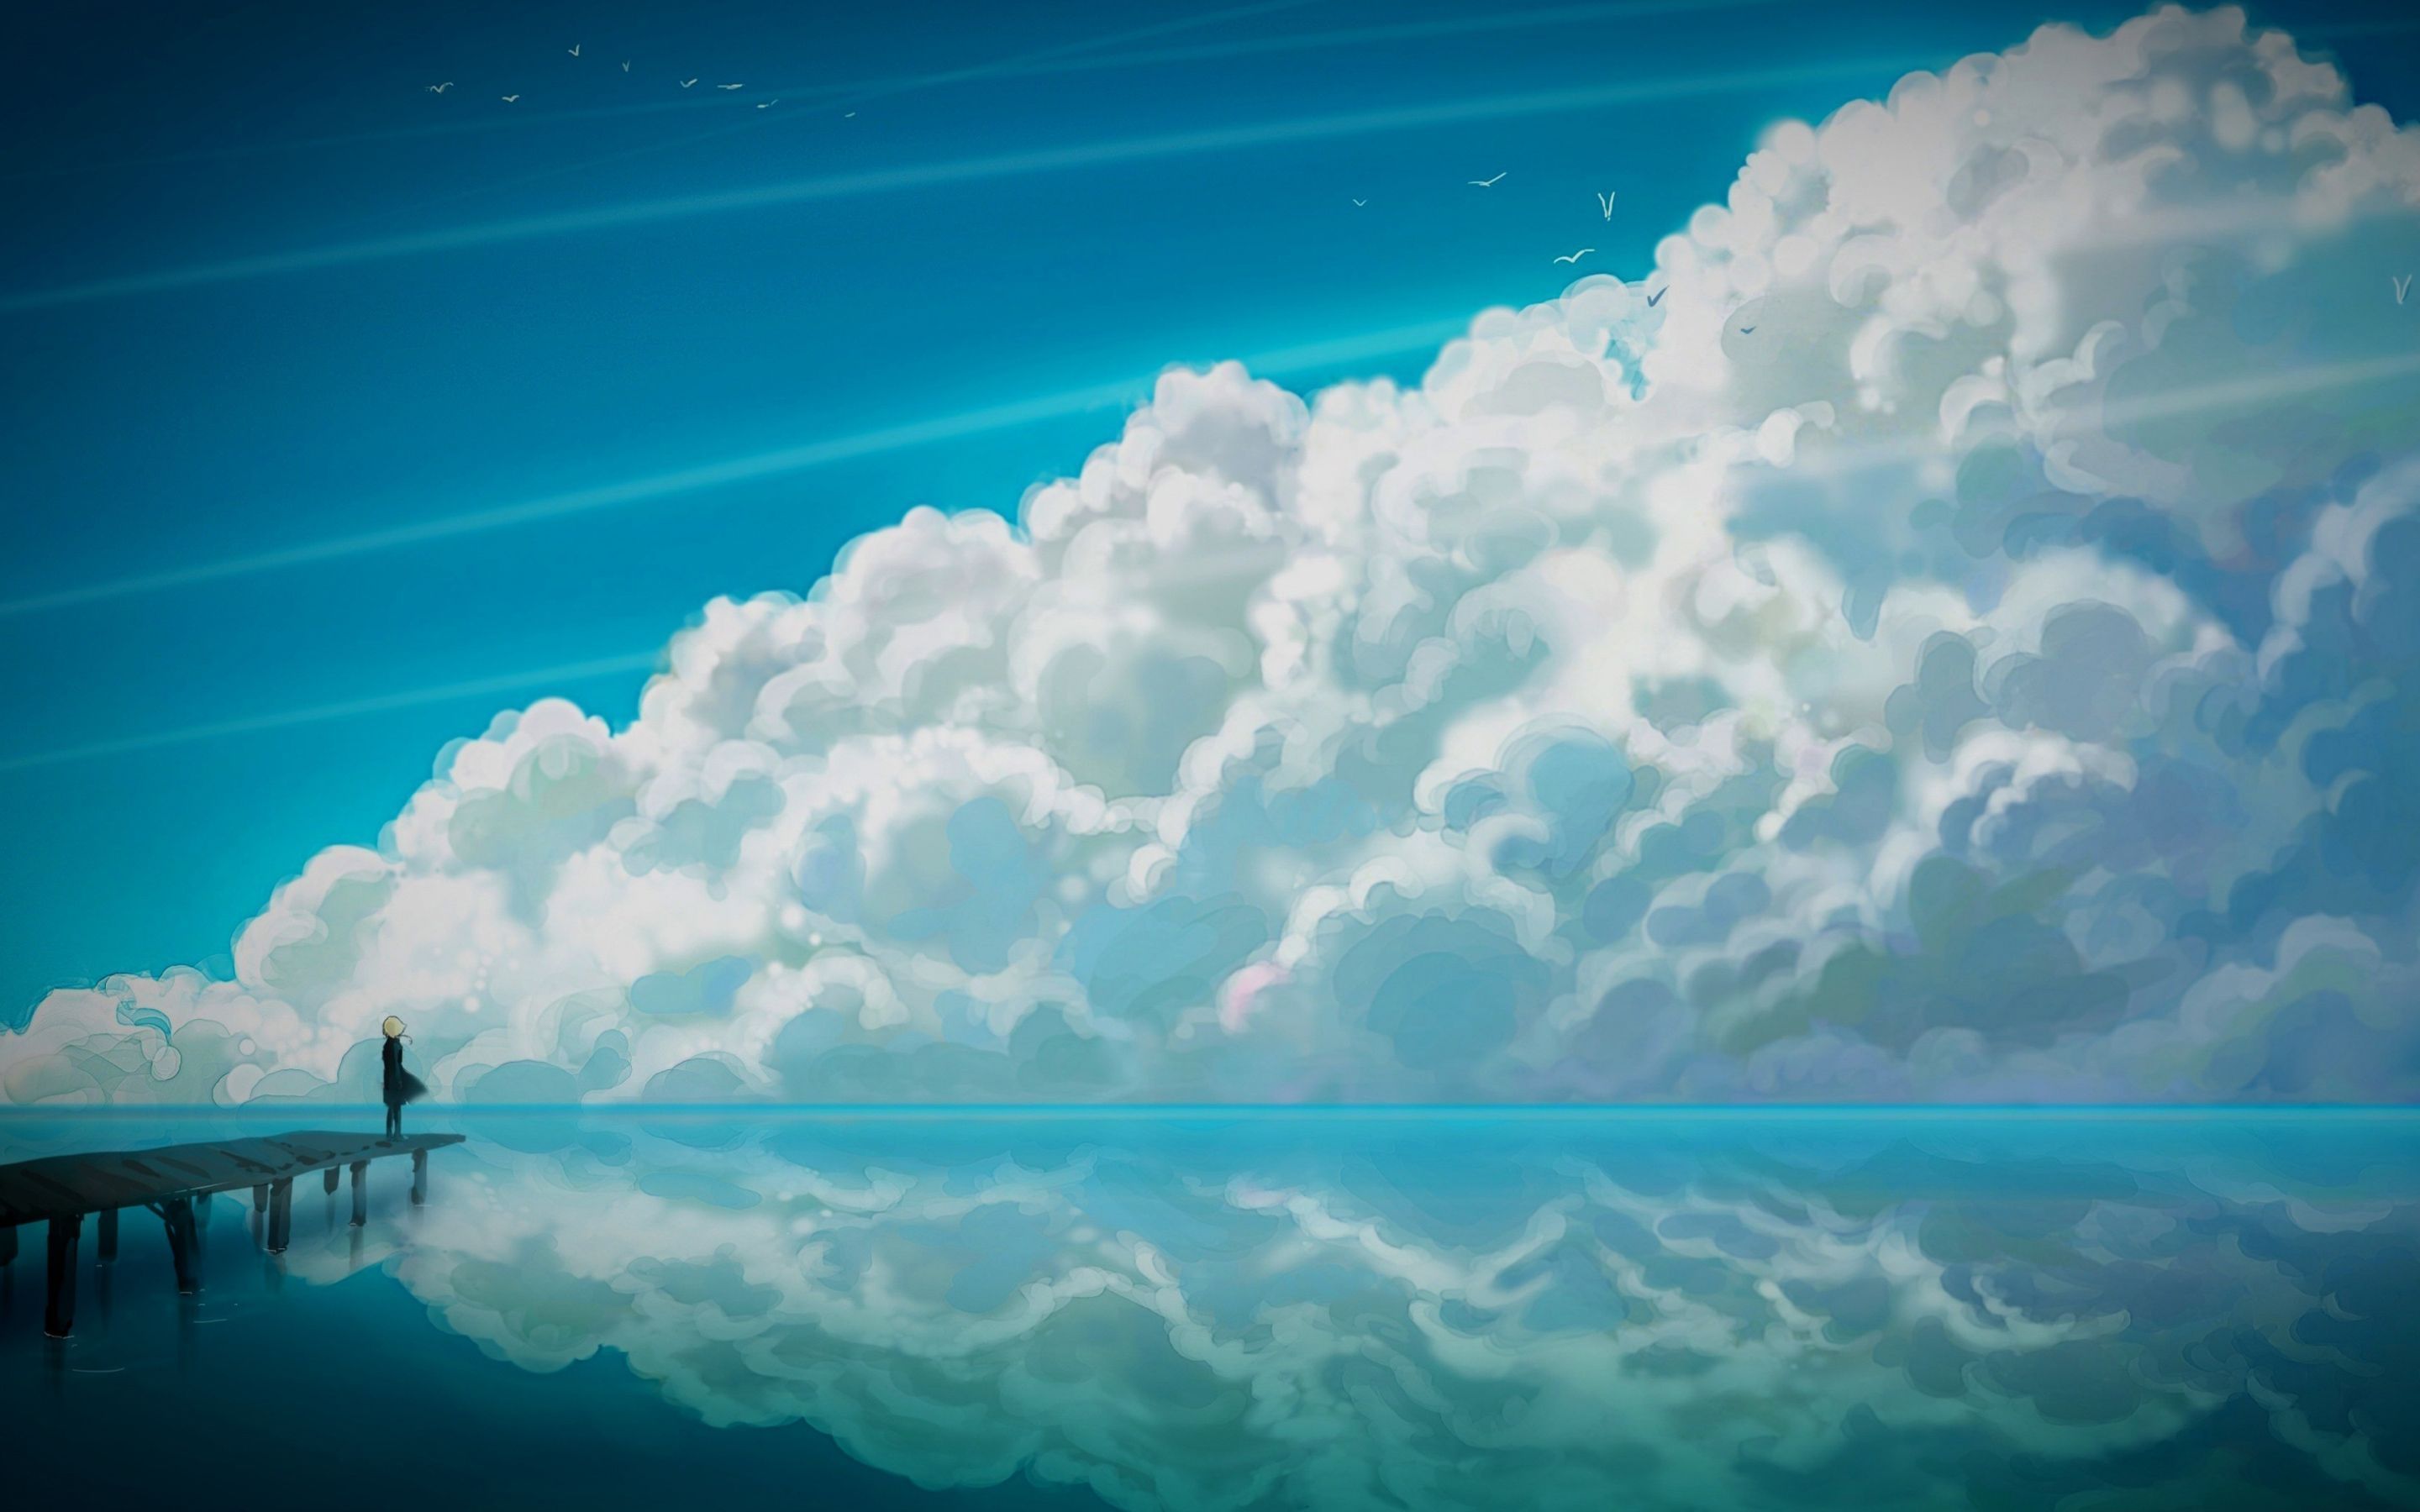 Blue Anime Sky Download HD Wallpapers From MG WallpaperDownload